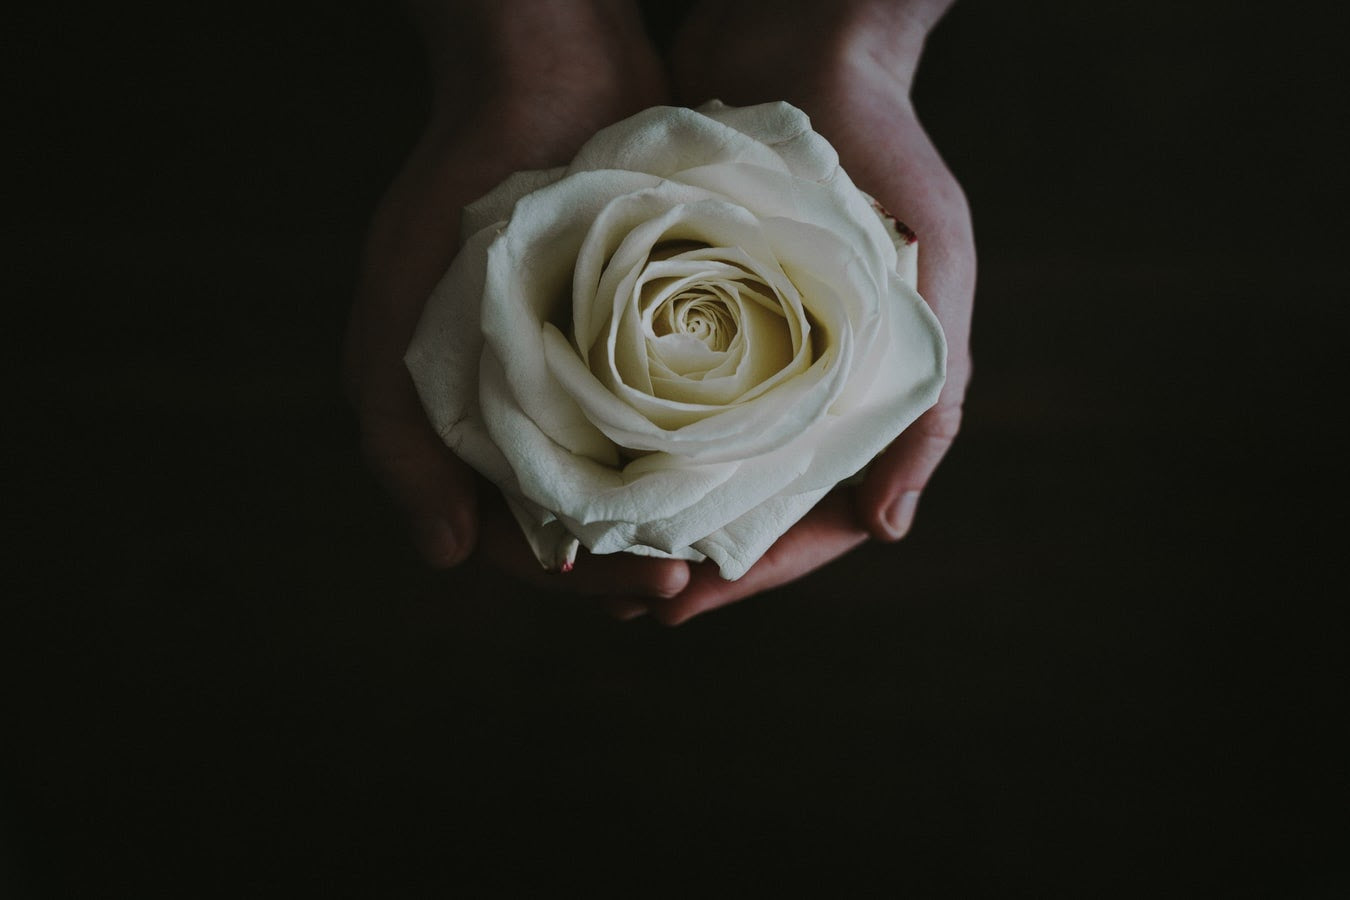 A single white rose being held delicately